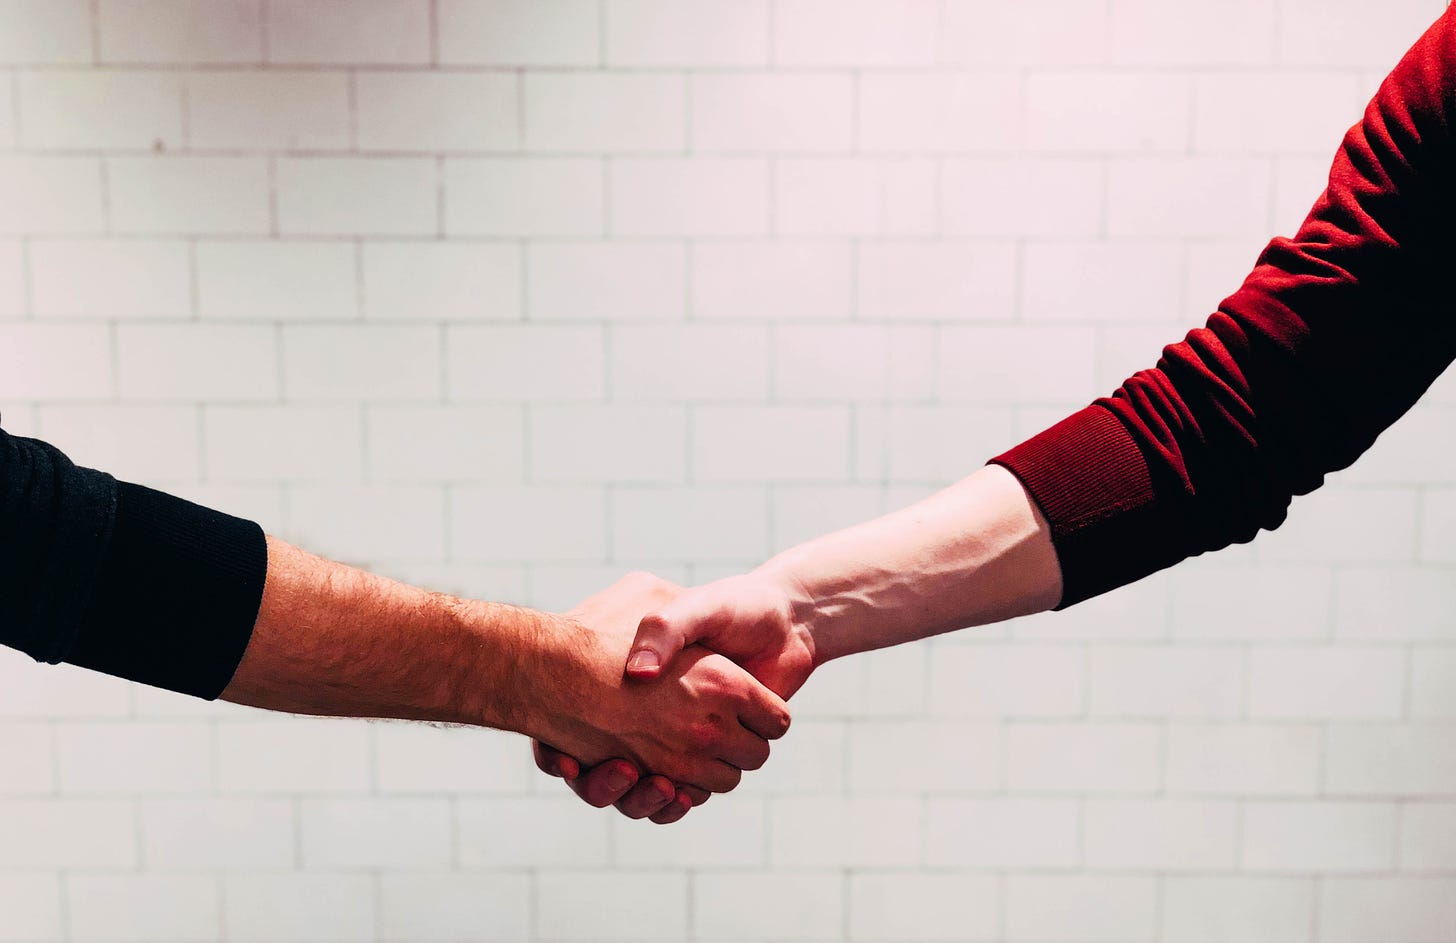 The arms of two caucasian people shaking hands against a white brick background. The arm on the left is wearing a black long-sleeved shirt, and the arm on the right is wearing a red long-sleeved shirt.